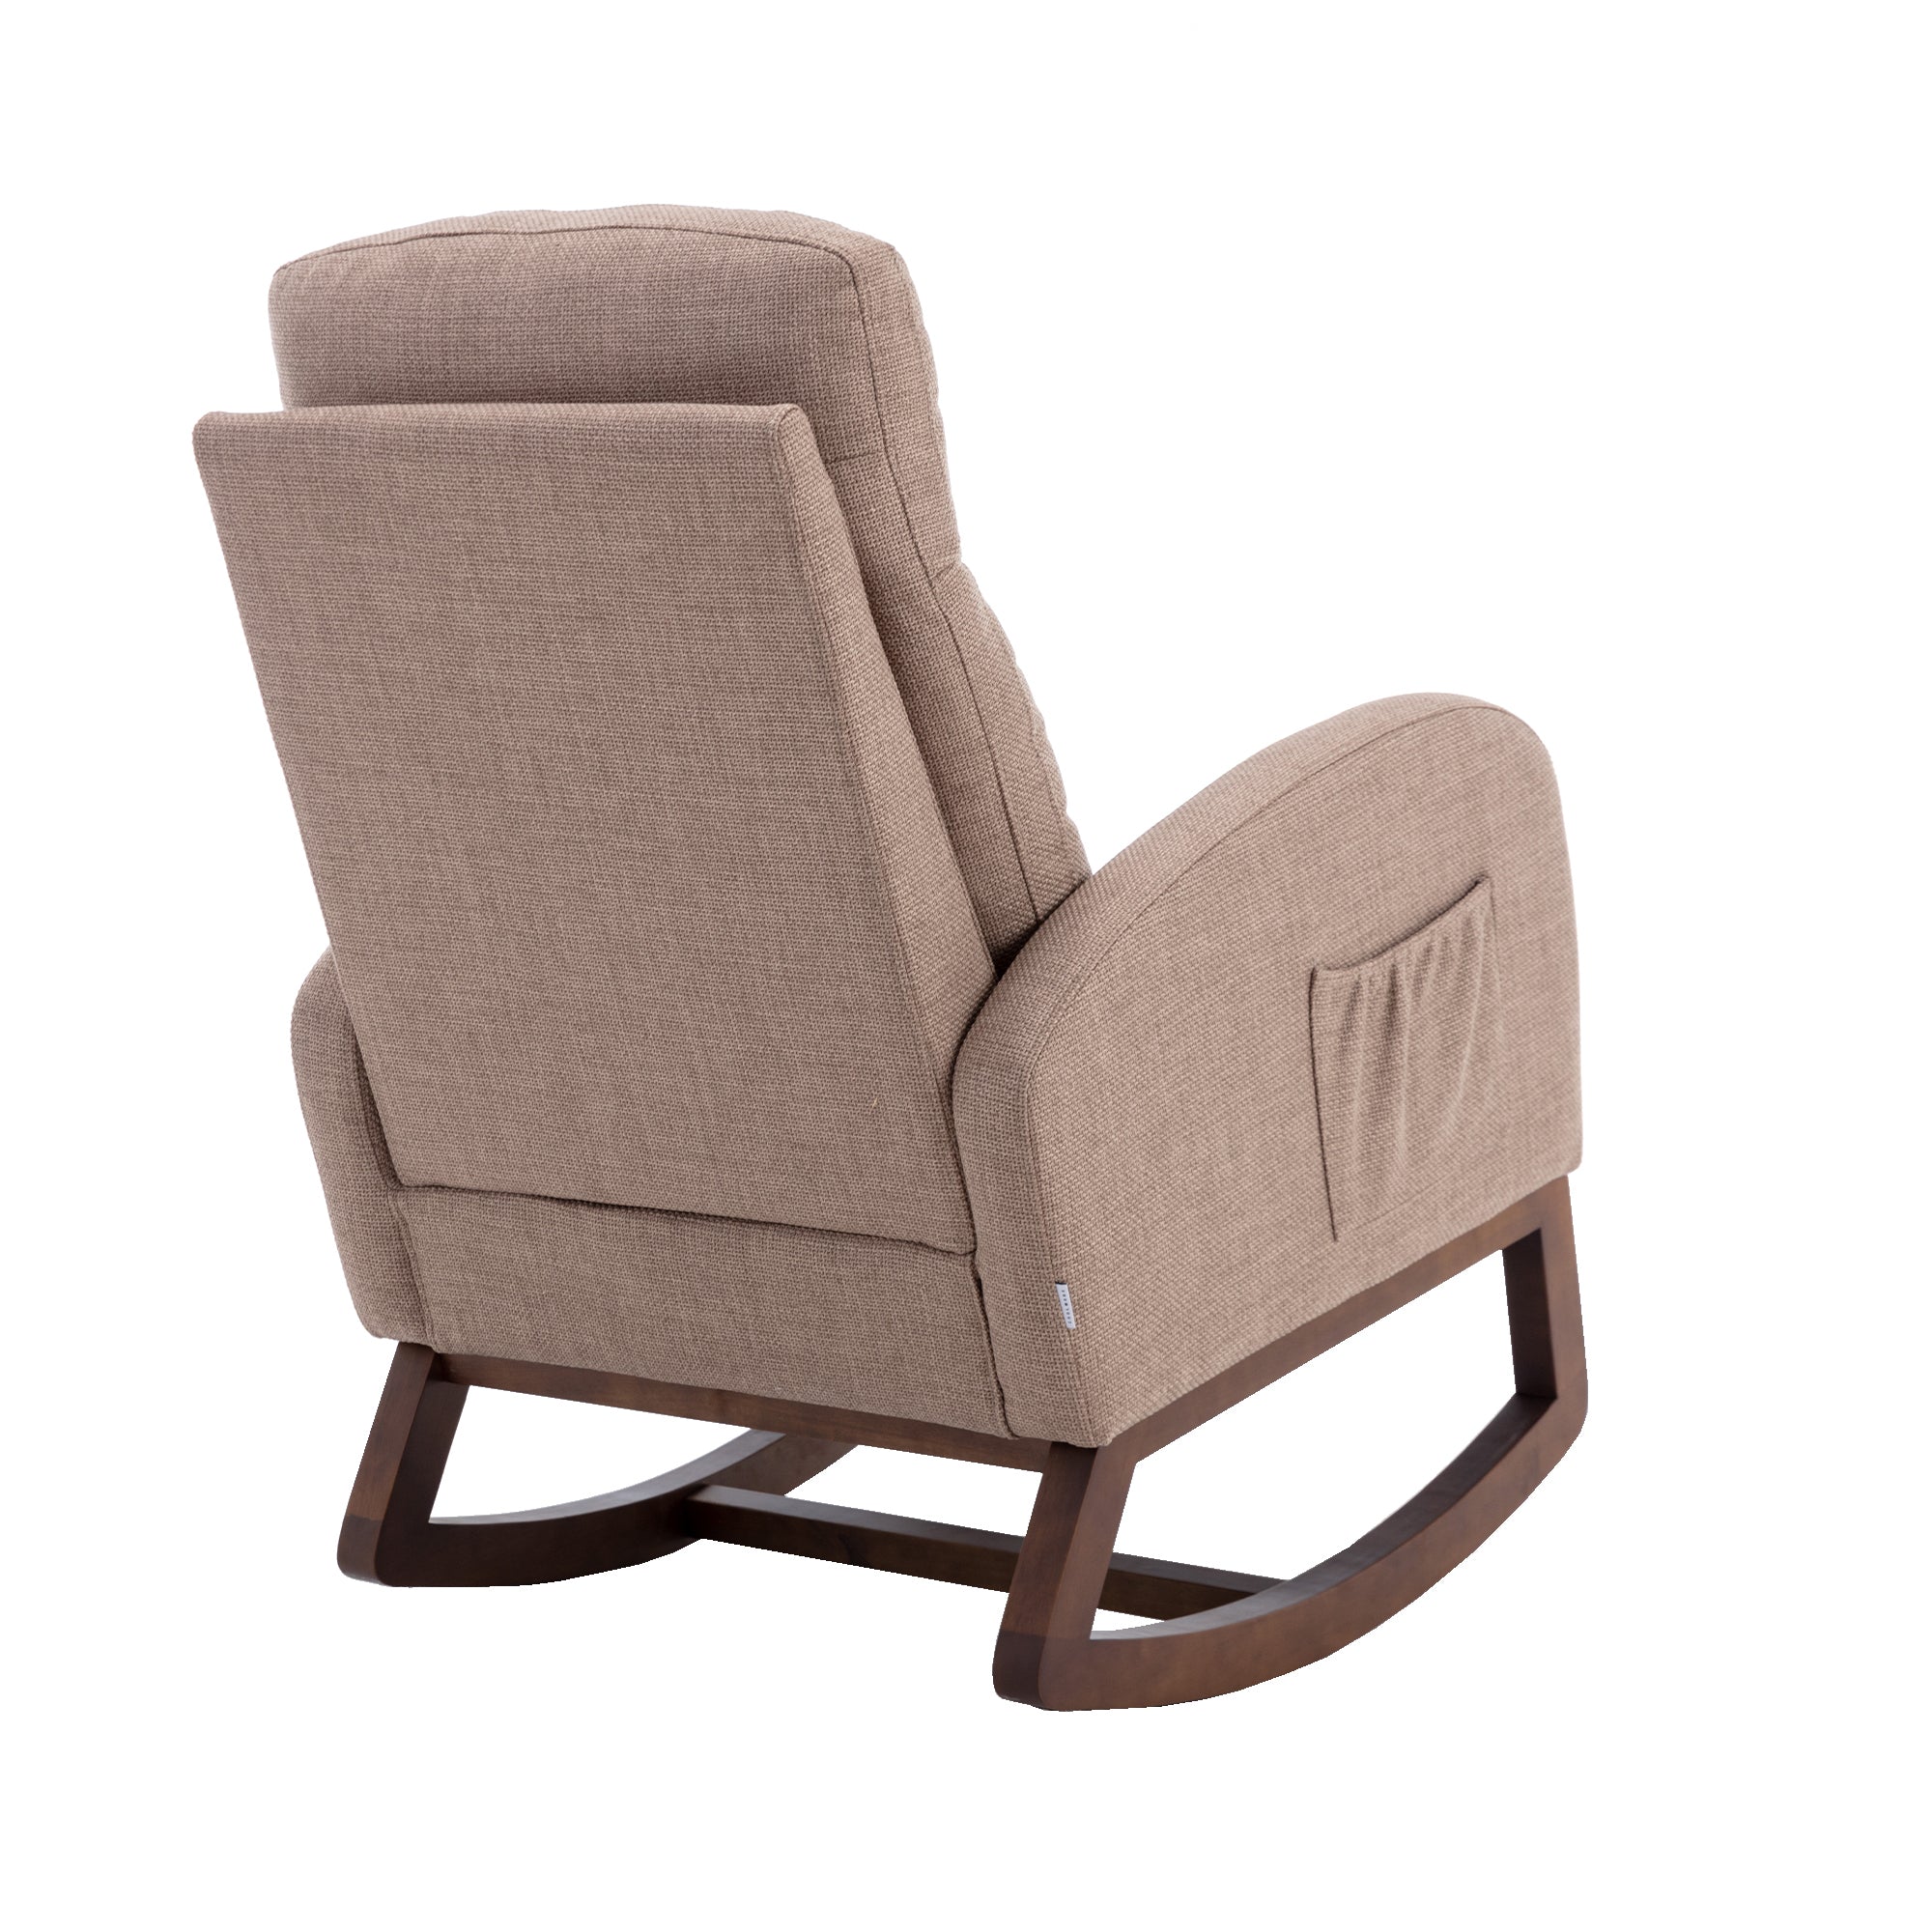 COOLMORE living room Comfortable rocking chair living camel-solid wood